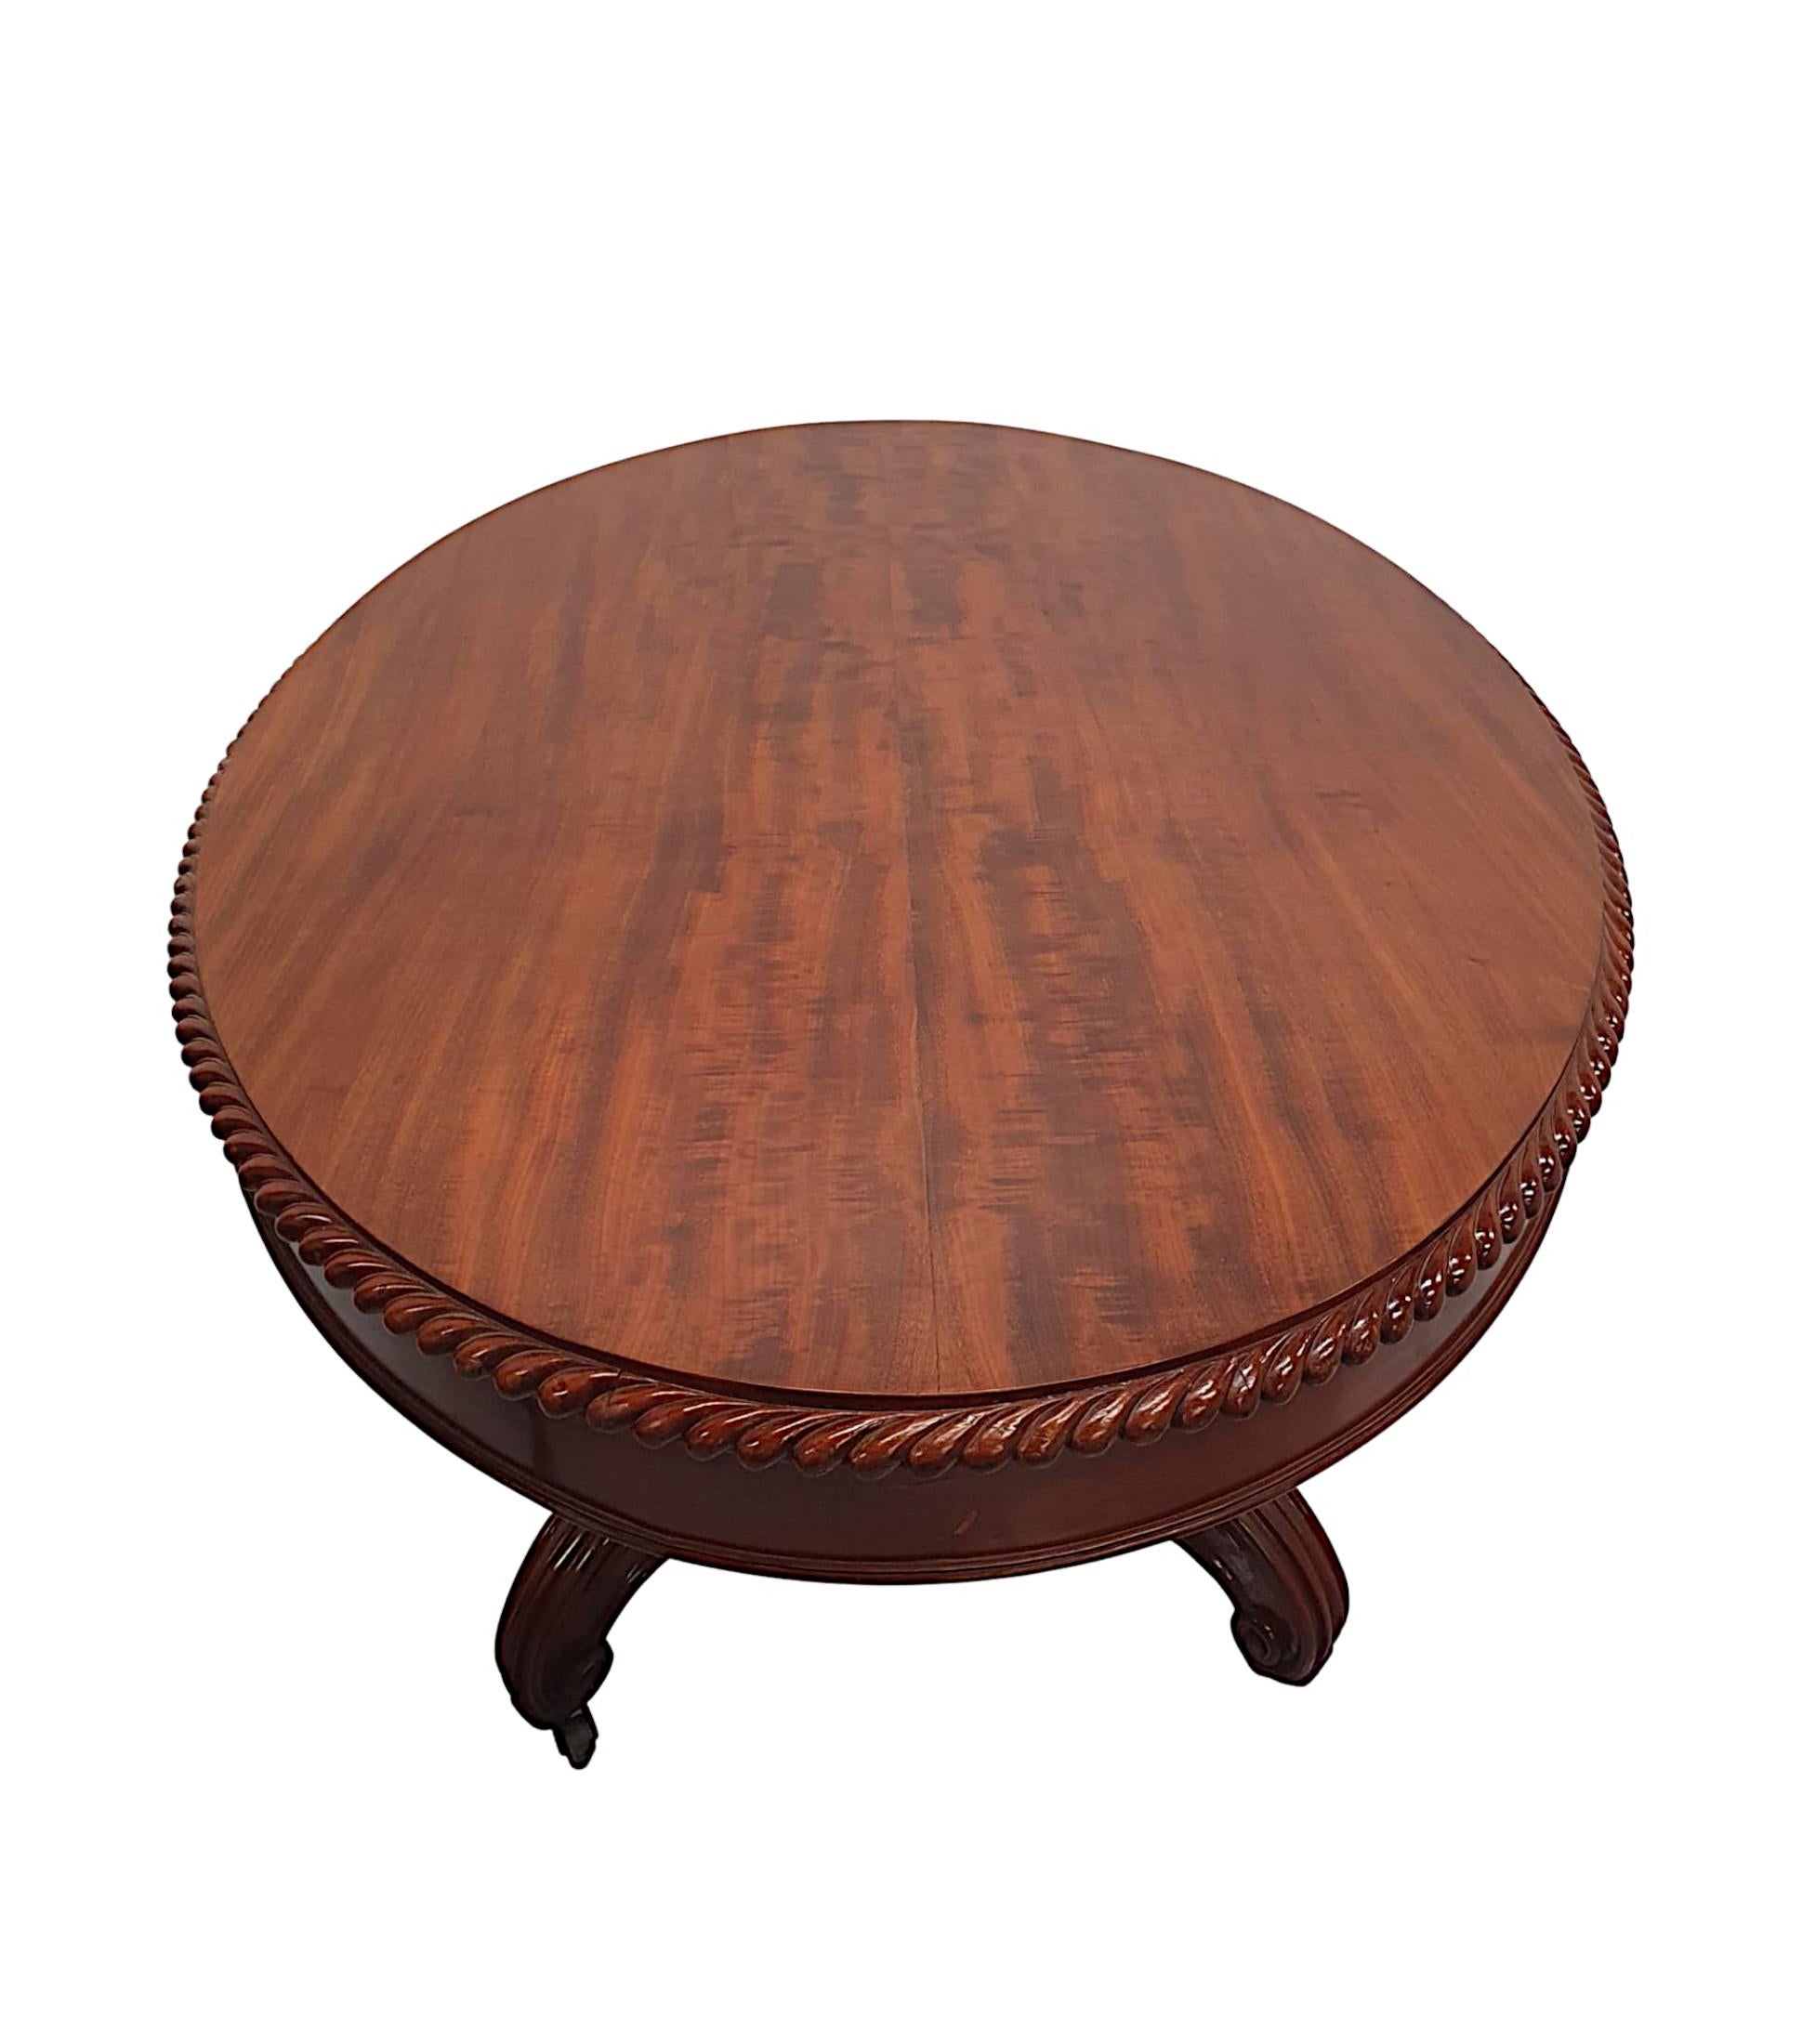 Brass A Rare 19th Century Figured Mahogany Oval Drum Table  For Sale